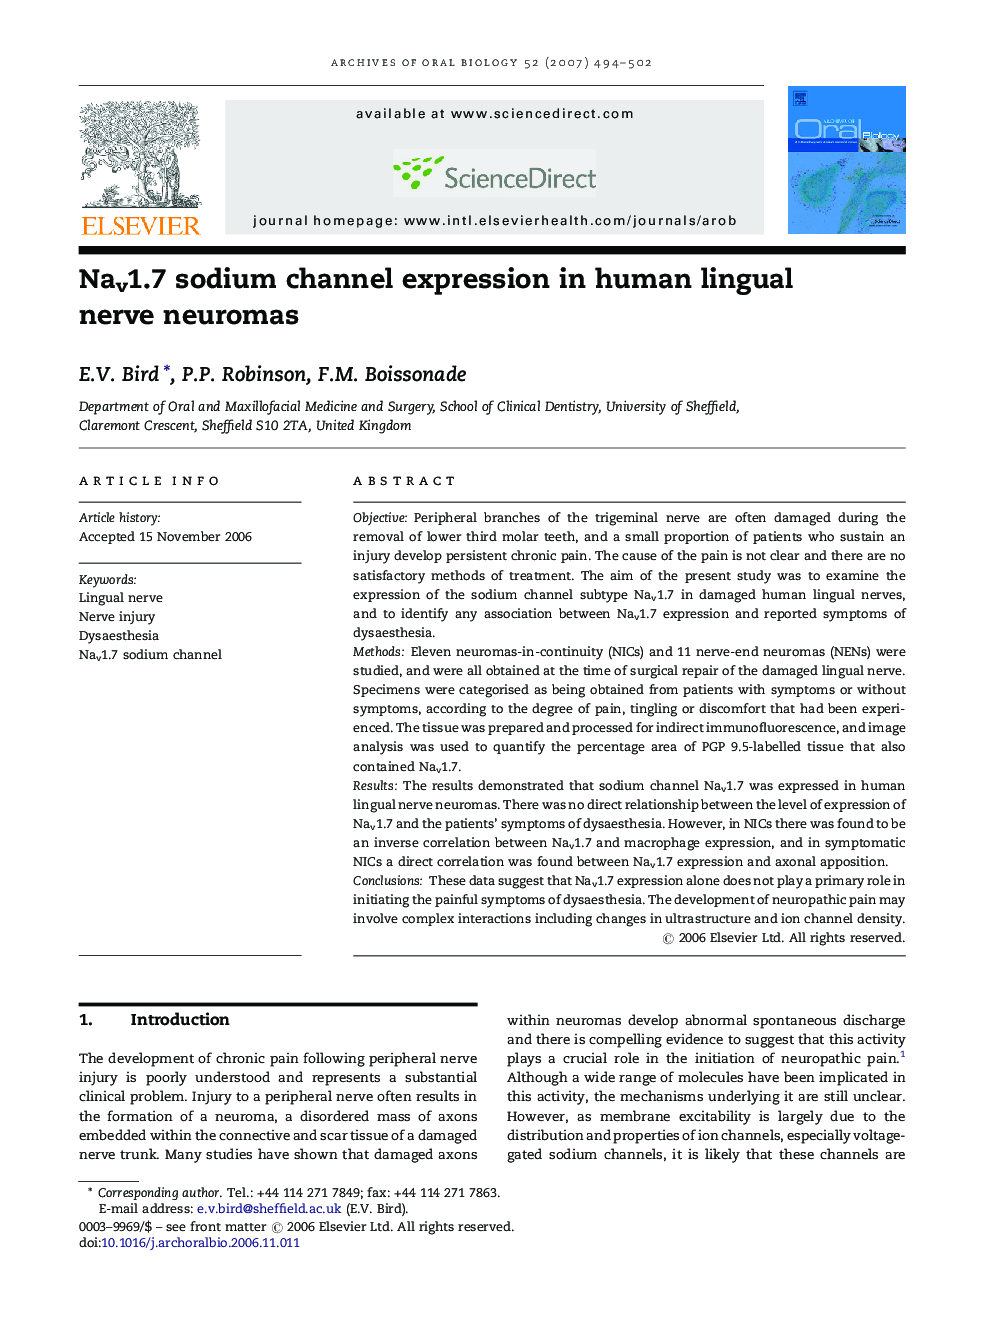 Nav1.7 sodium channel expression in human lingual nerve neuromas